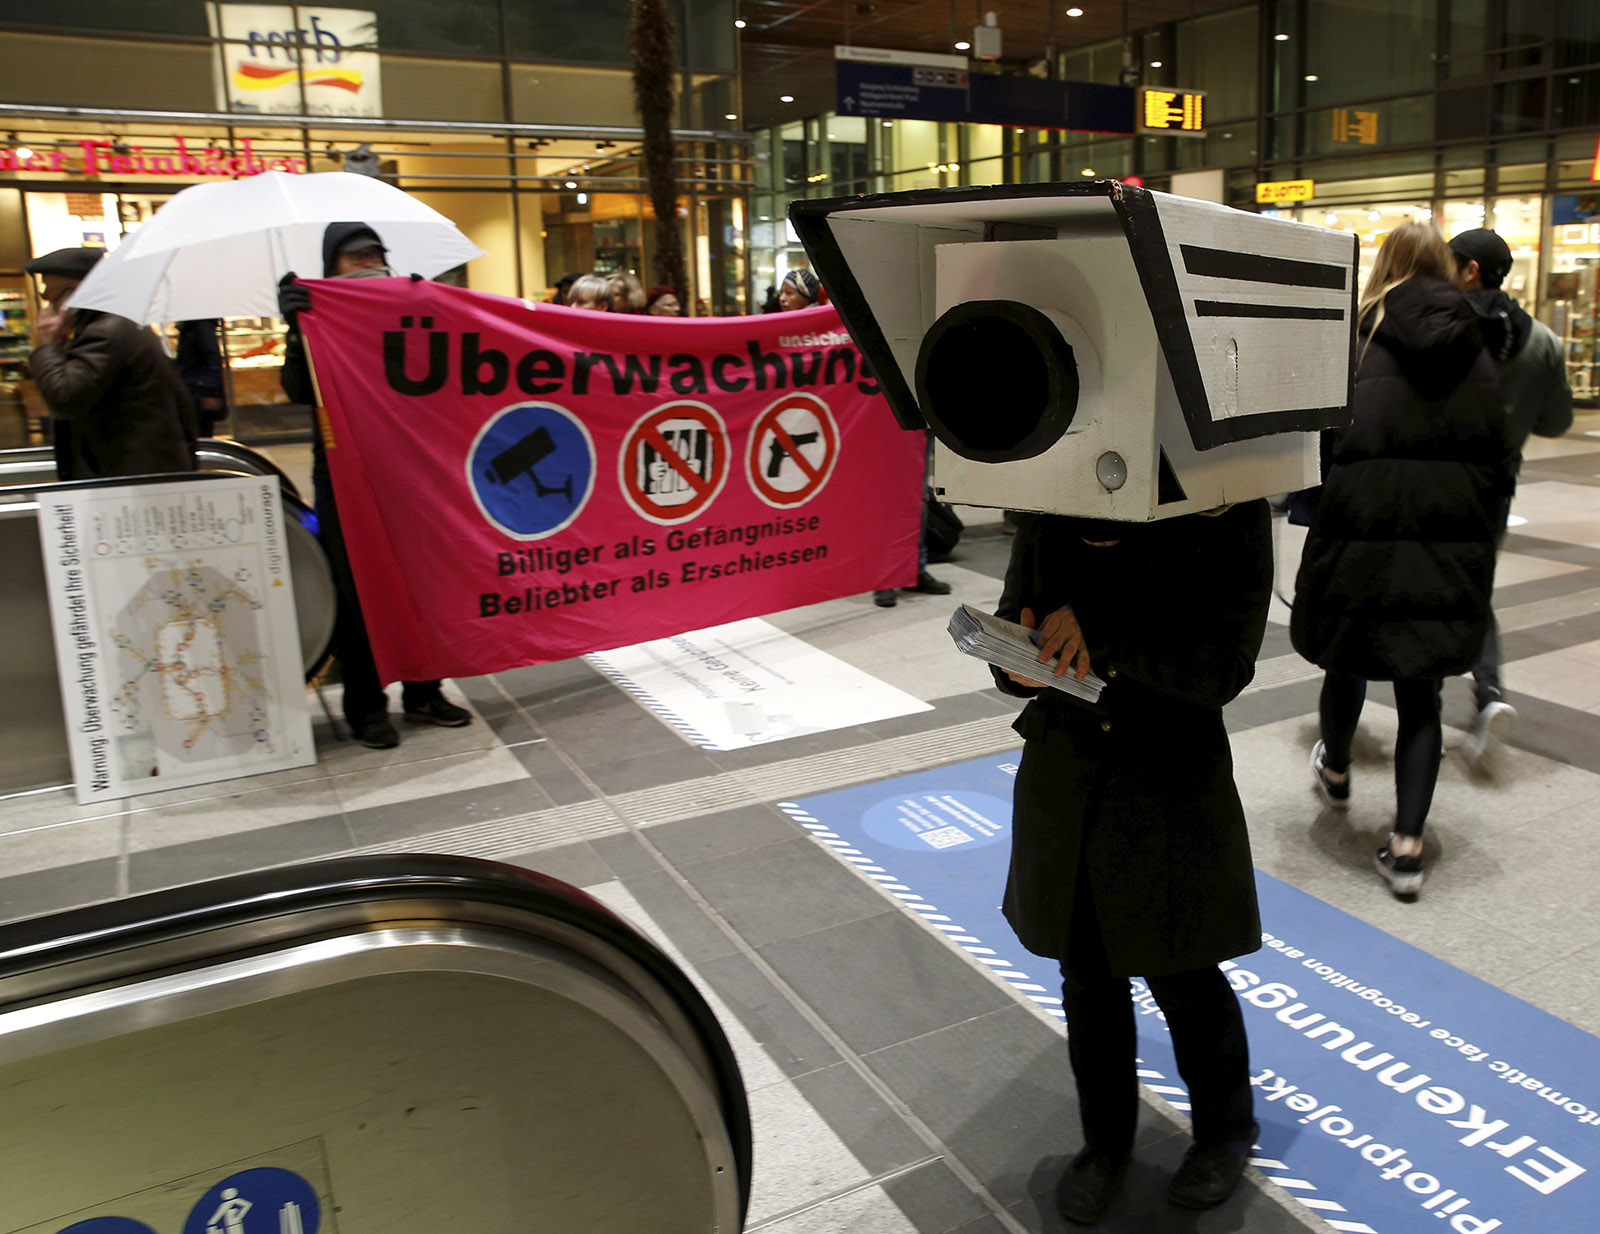 A demonstrator dressed as a security camera at an anti-surveillance protest, Berlin, November 2017